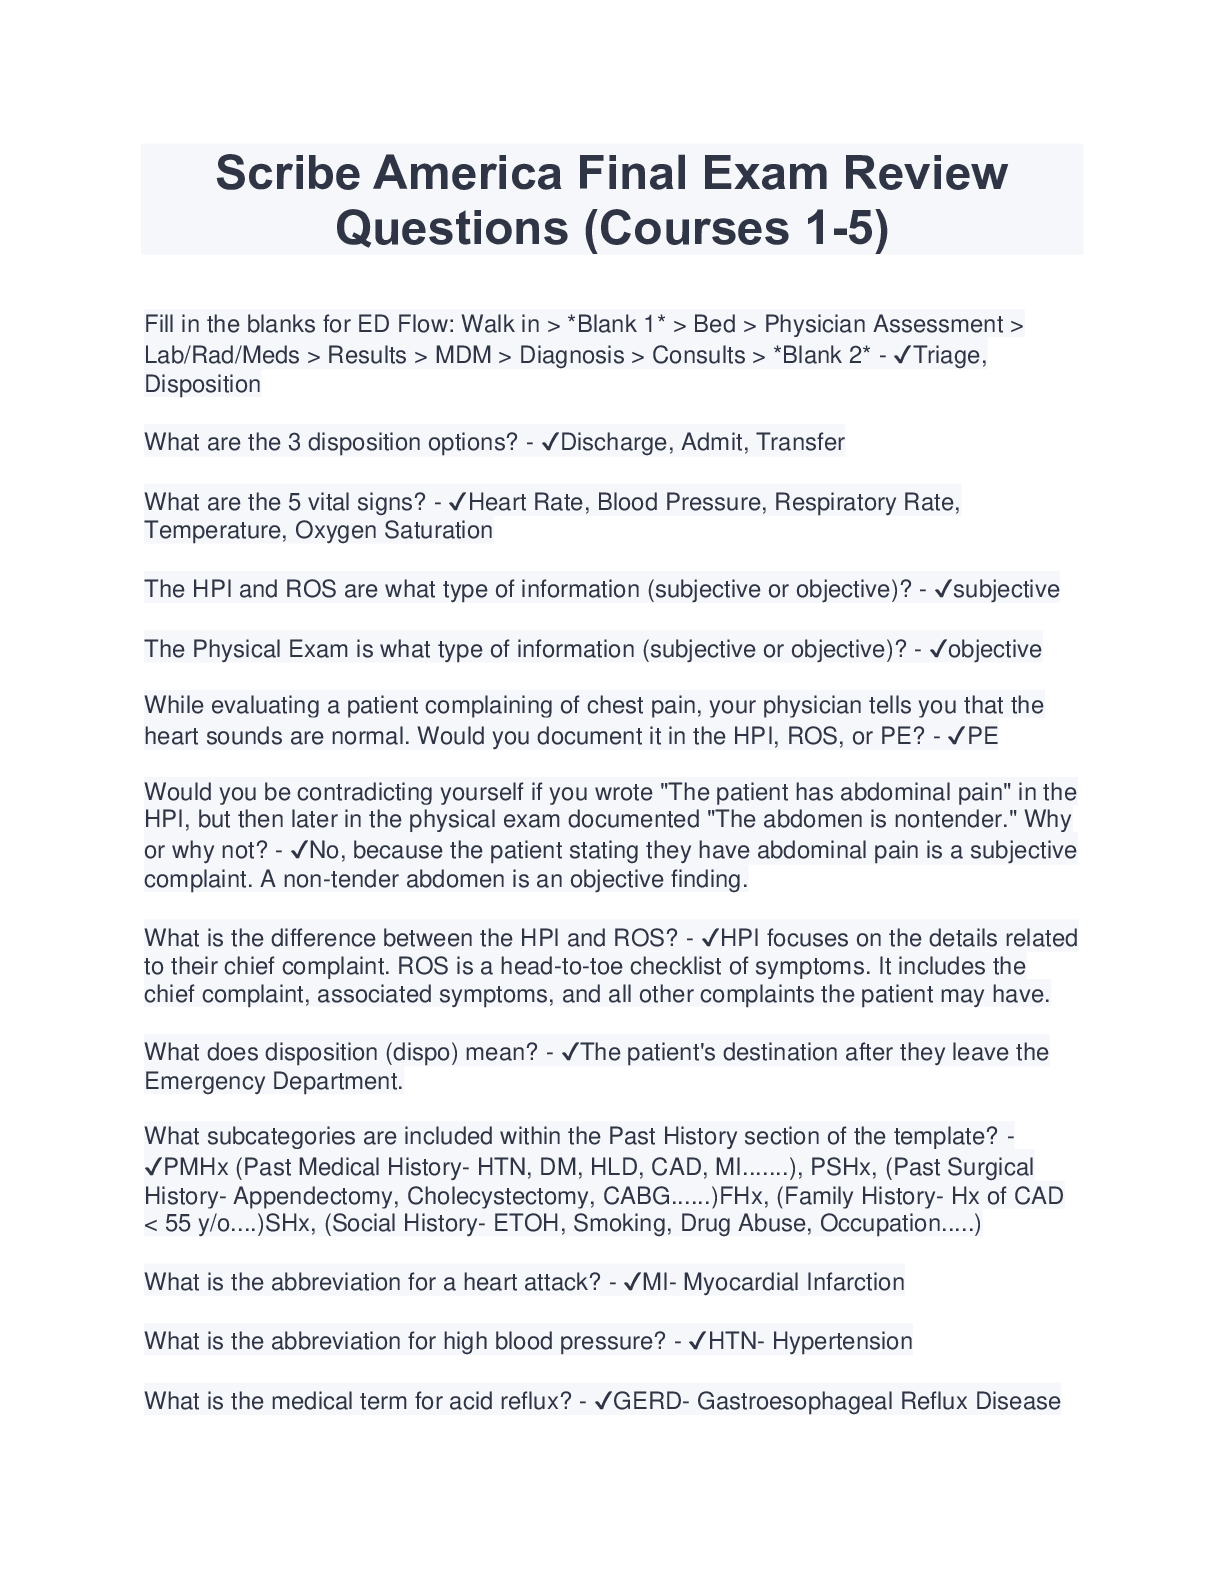 Scribe America Final Exam Review Questions (Courses 15) Latest 2023/2024 Browsegrades